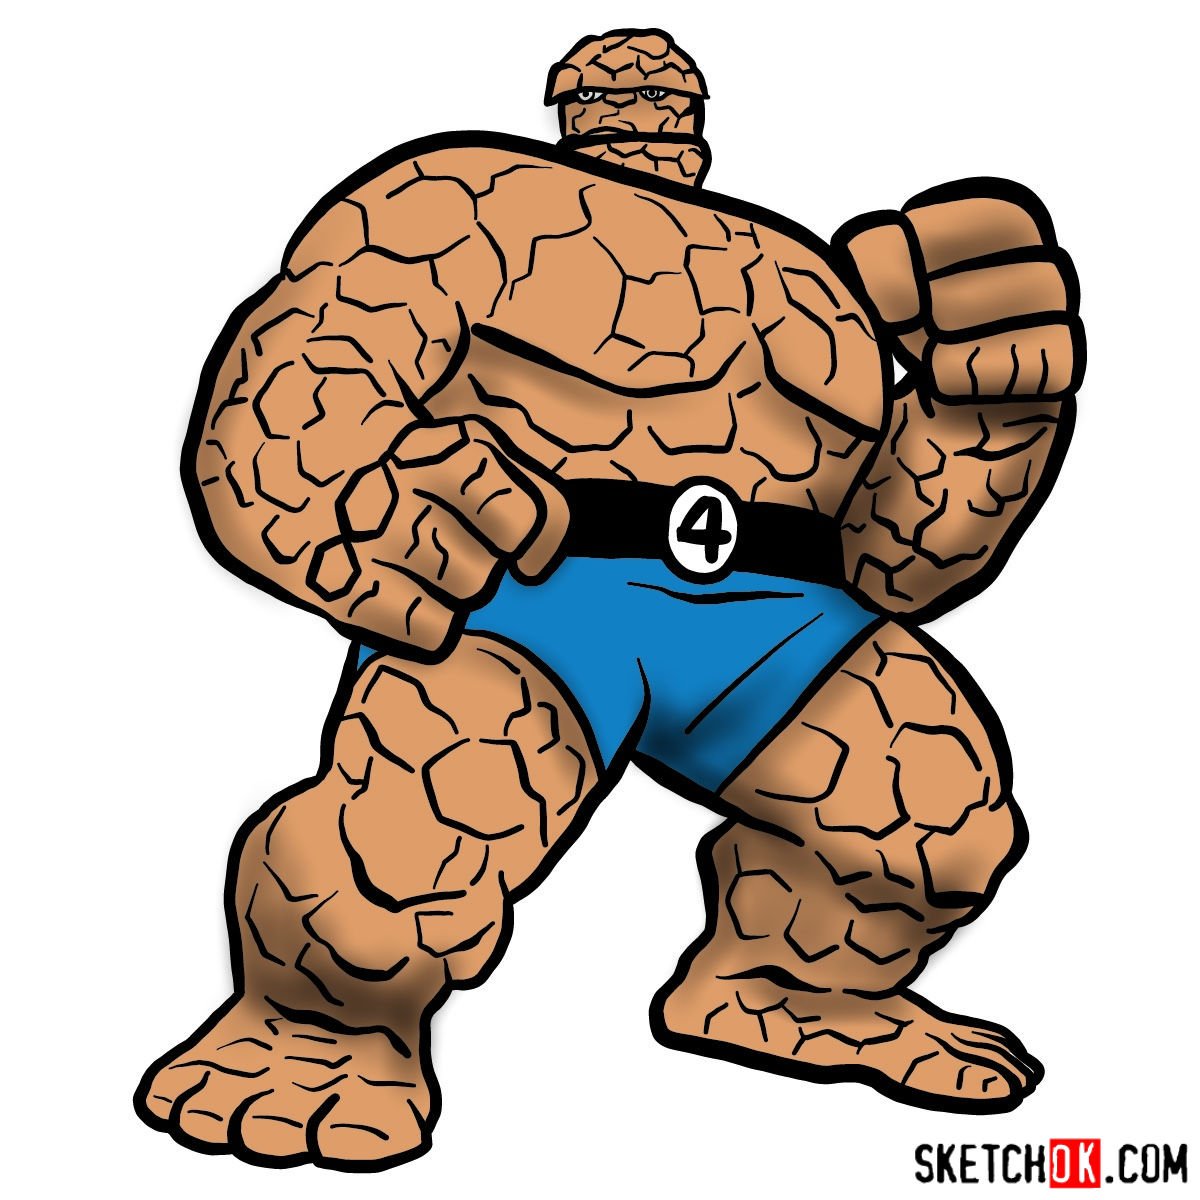 How to draw The Thing (Fantastic Four) - Sketchok easy drawing guides